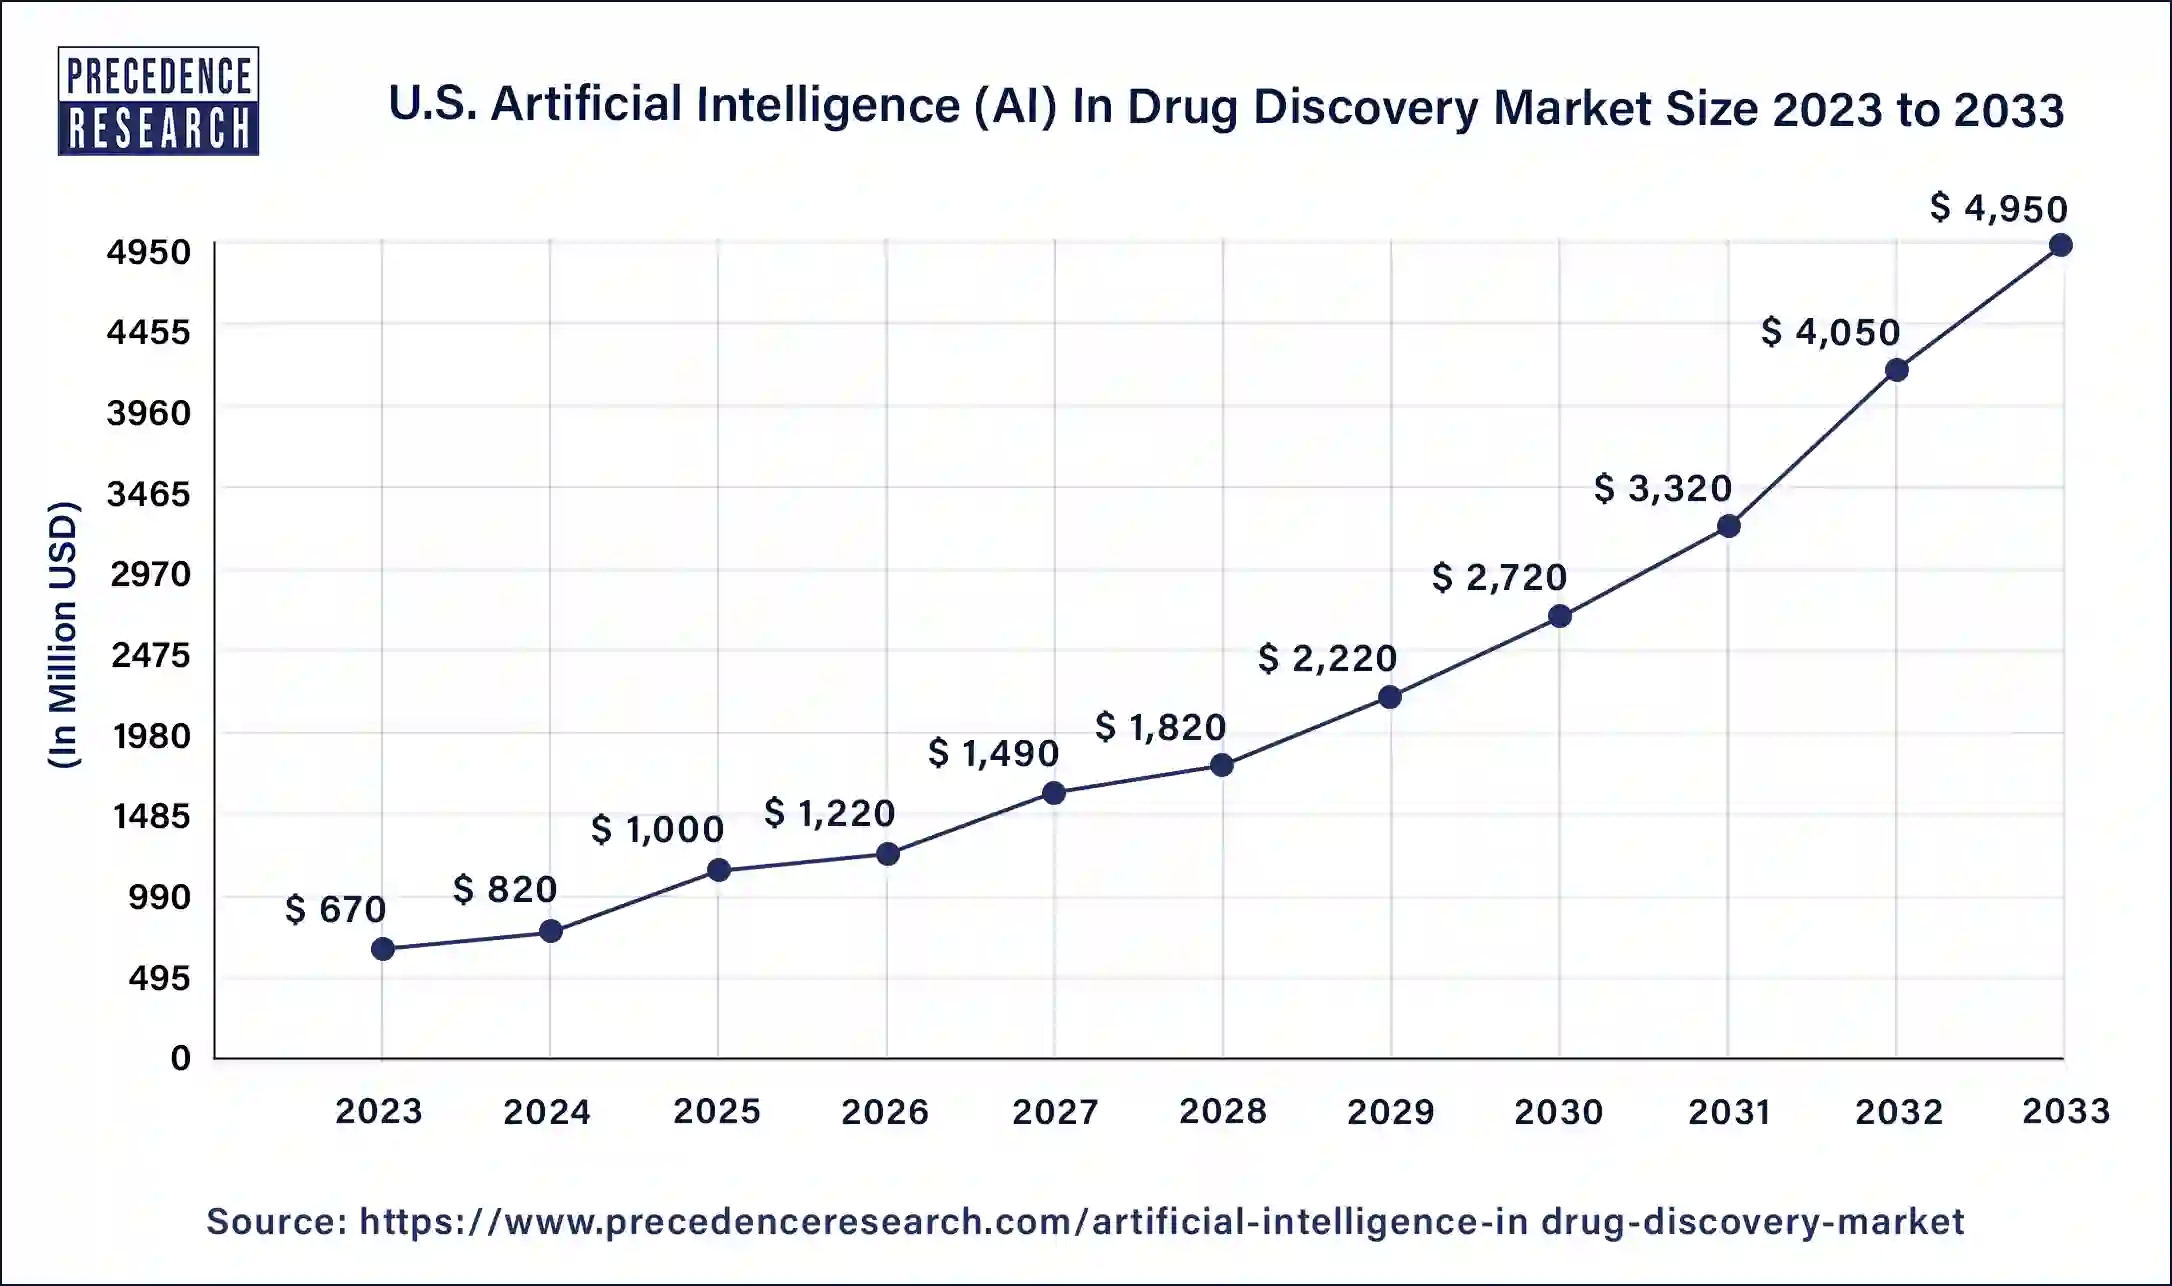 U.S. Artificial Intelligence (AI) In Drug Discovery Market Size 2024 to 2033